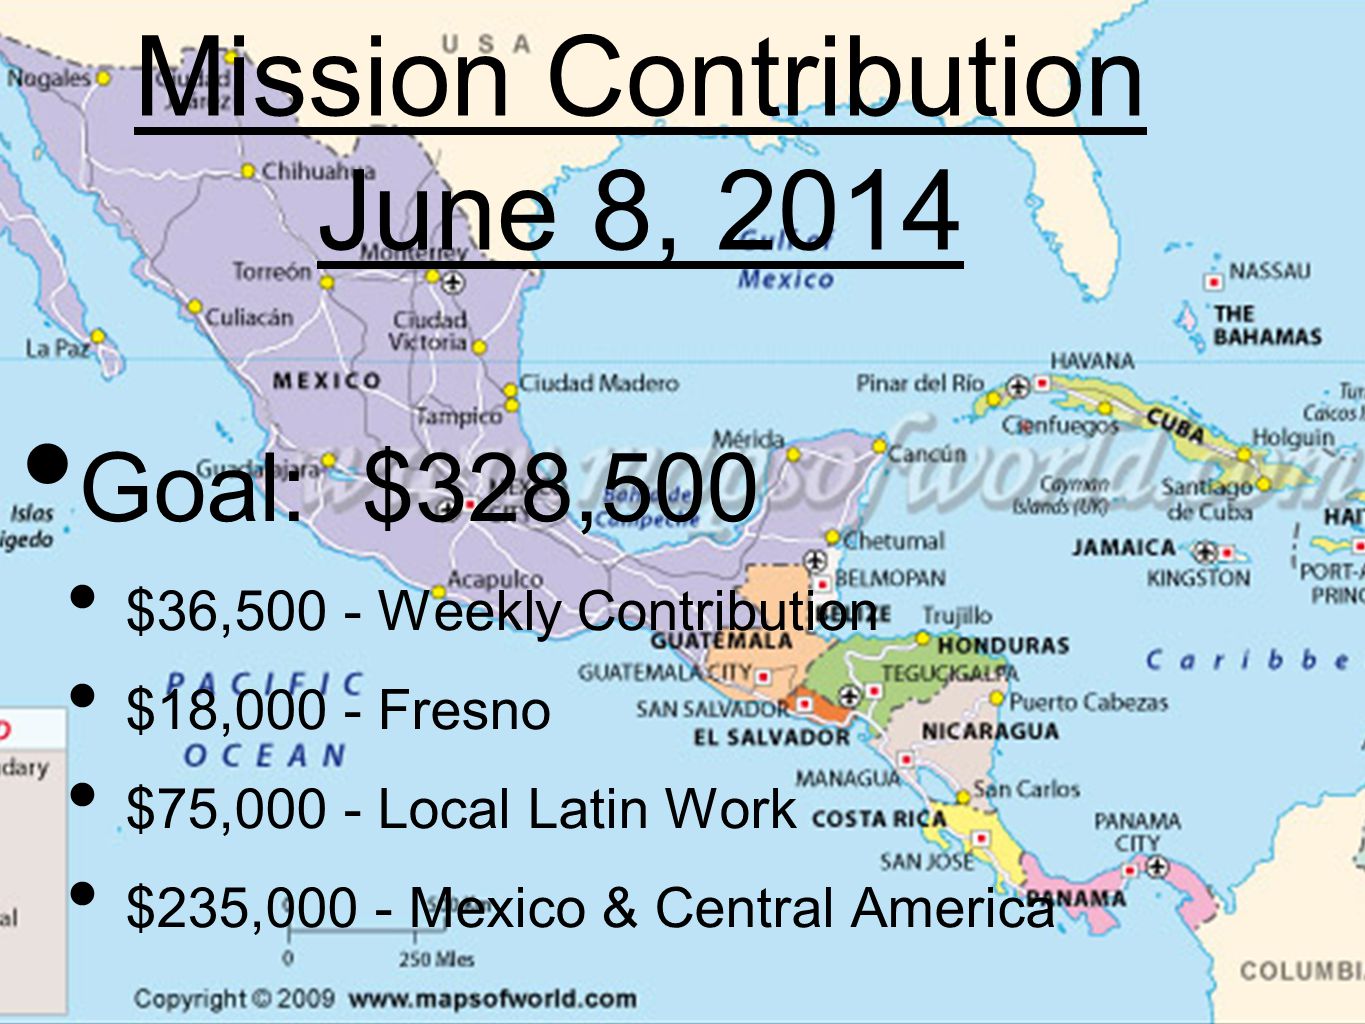 Mission Contribution June 8, 2014 Goal: $328,500 $36,500 - Weekly Contribution $18,000 - Fresno $75,000 - Local Latin Work $235,000 - Mexico & Central America